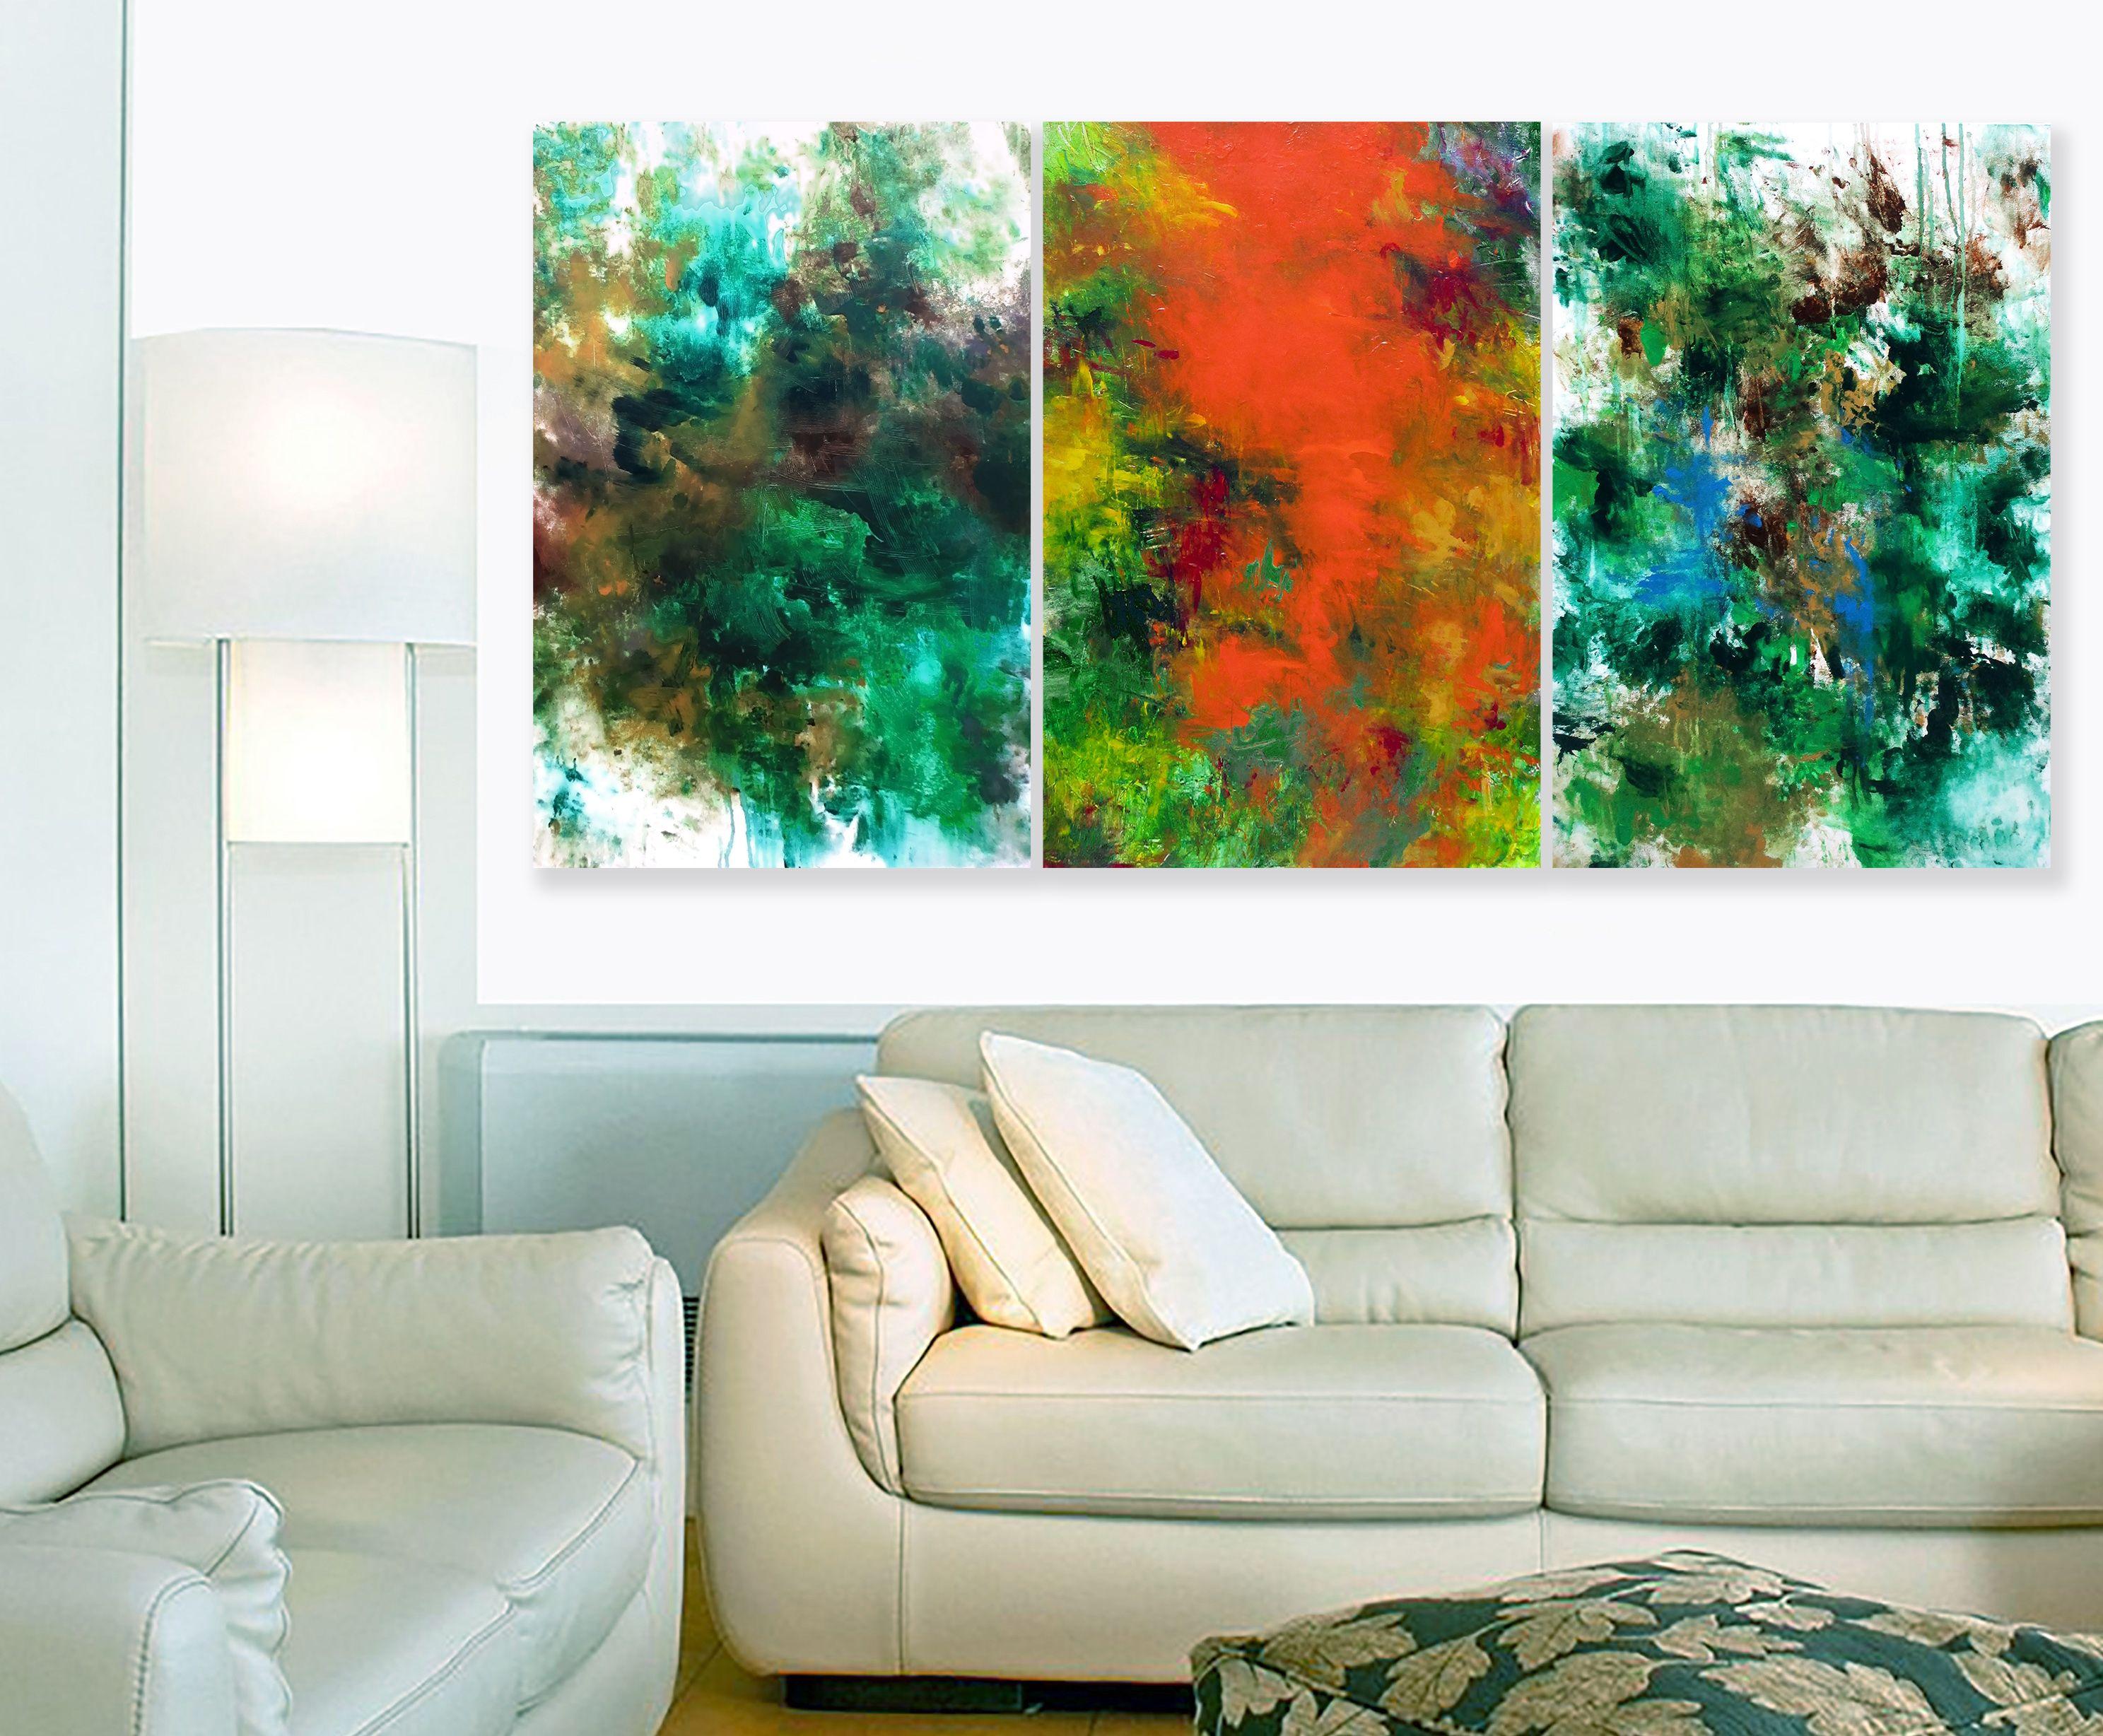 Provincial Decor, Painting, Acrylic on Canvas For Sale 3